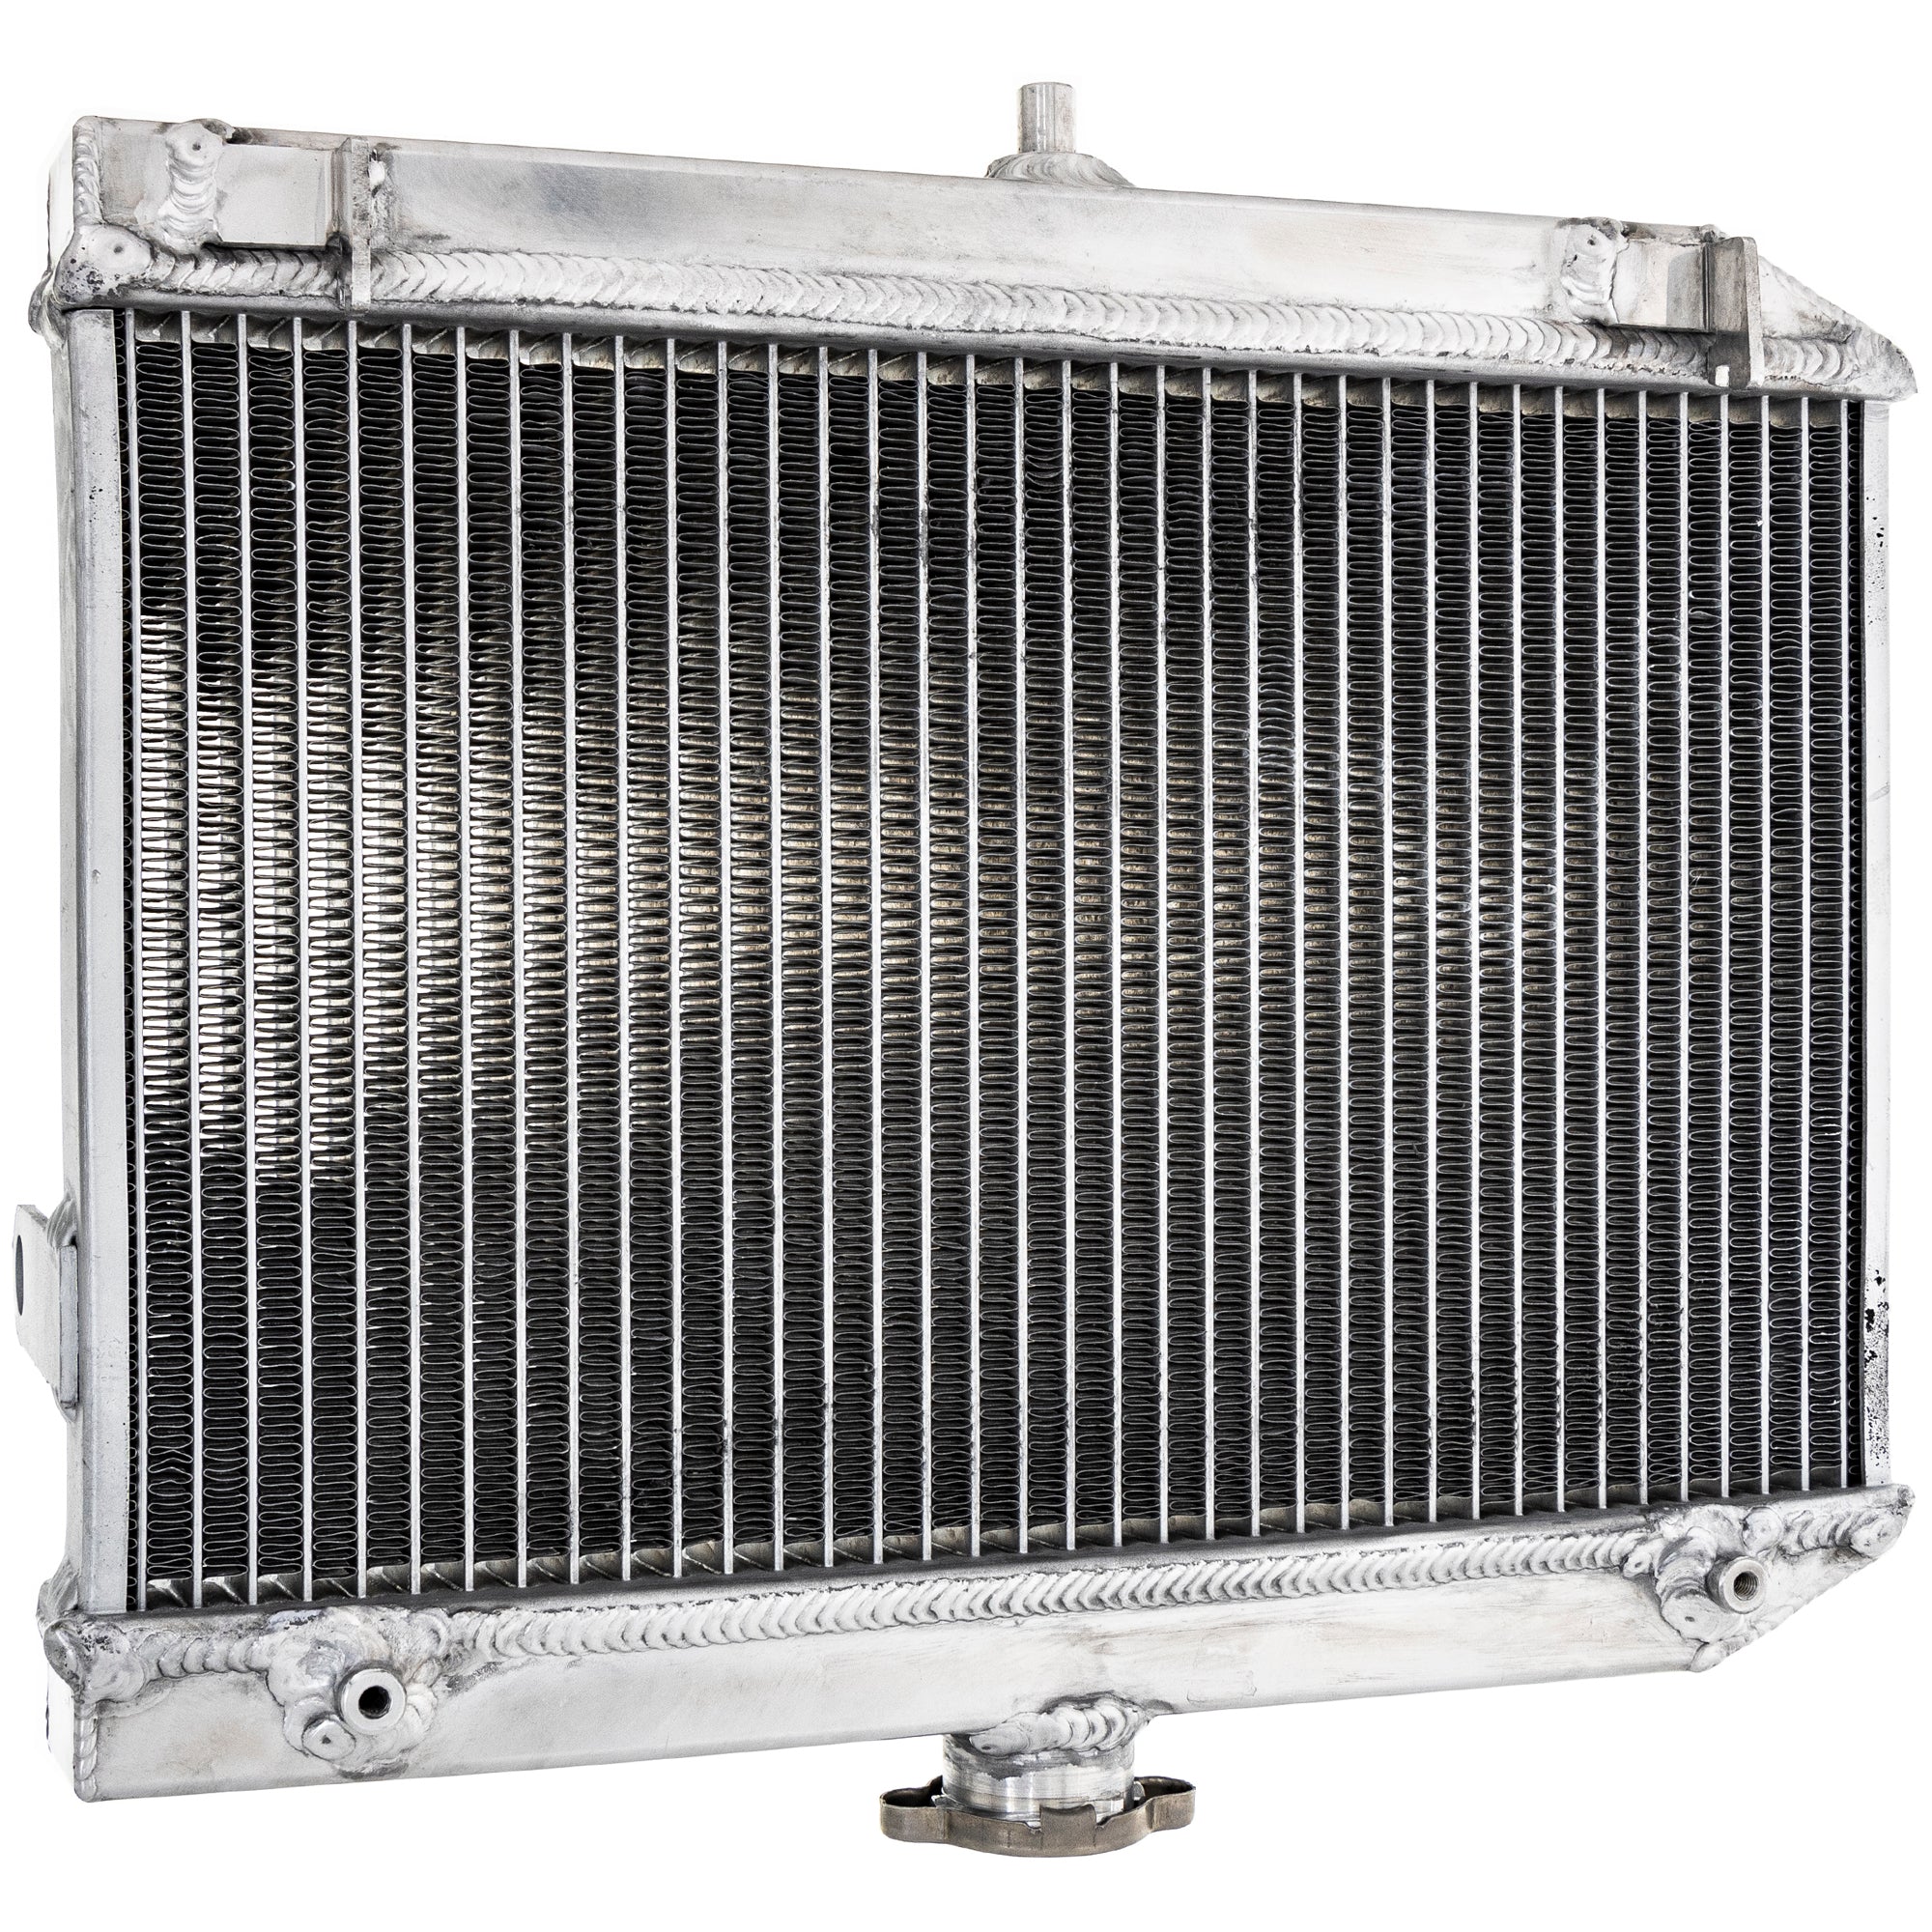 NICHE 519-CRD2231A High Capacity Radiator for zOTHER King